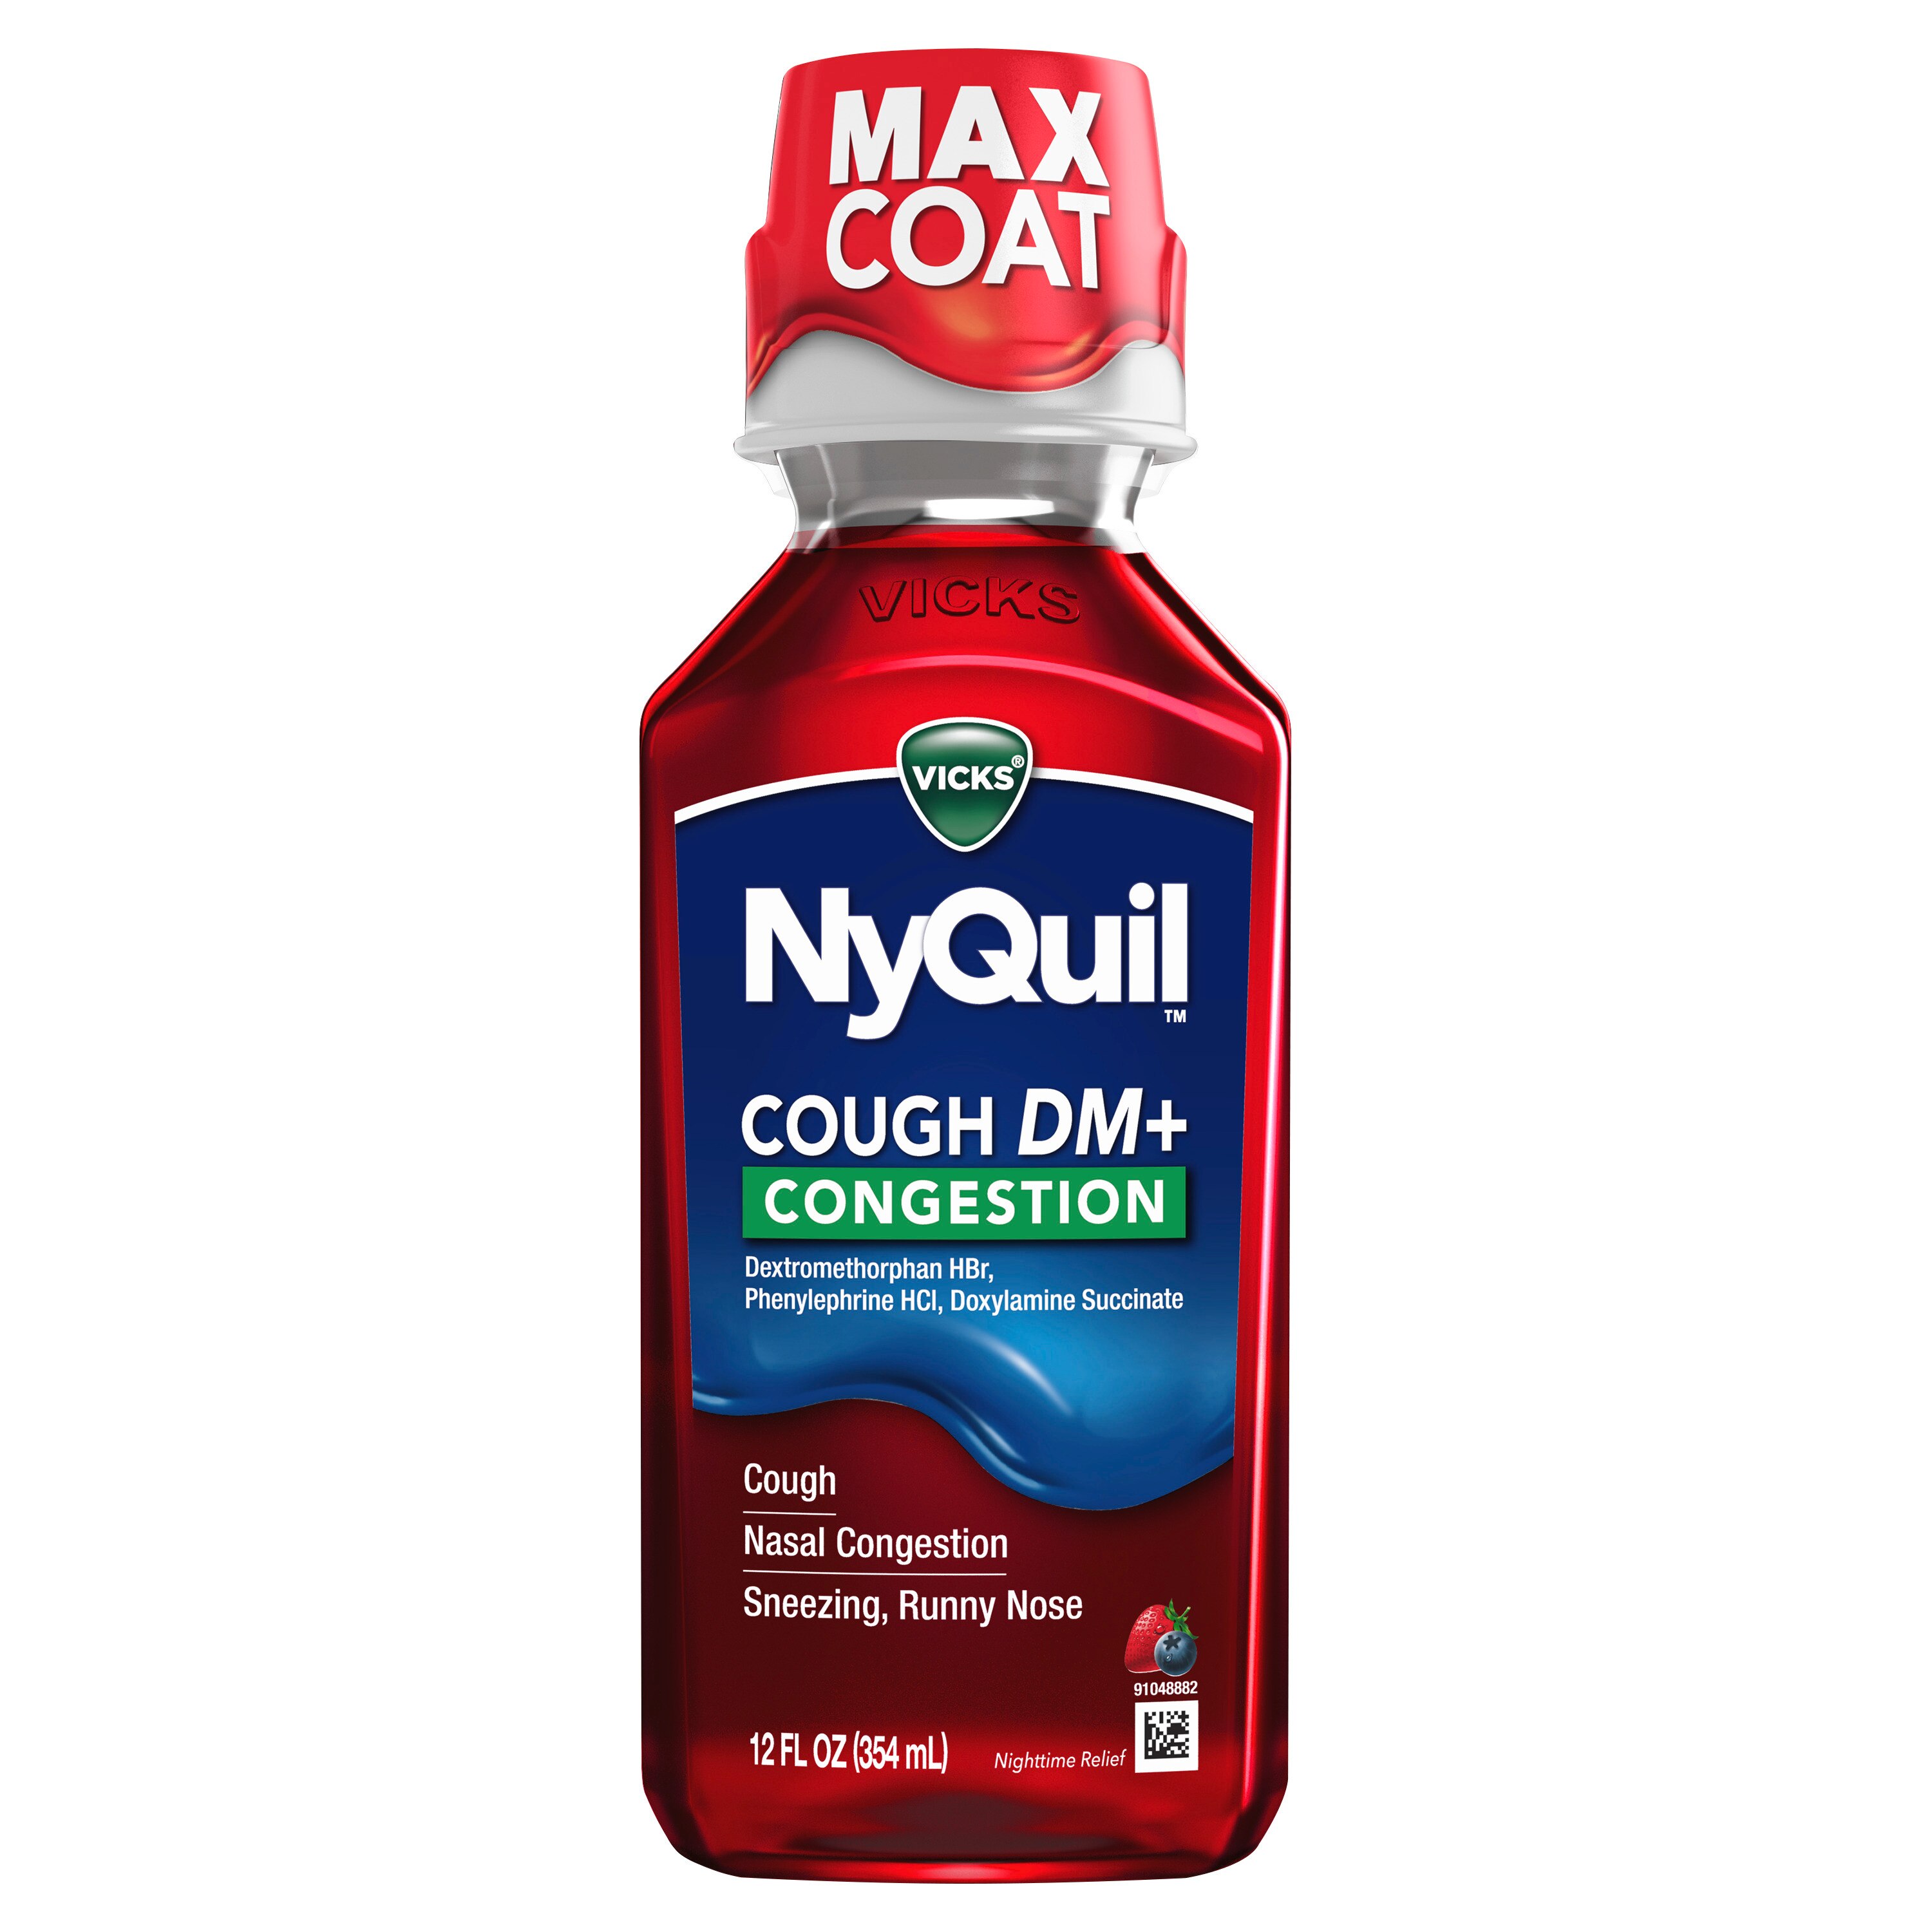 Does Nyquil Cough Dm Have Alcohol?